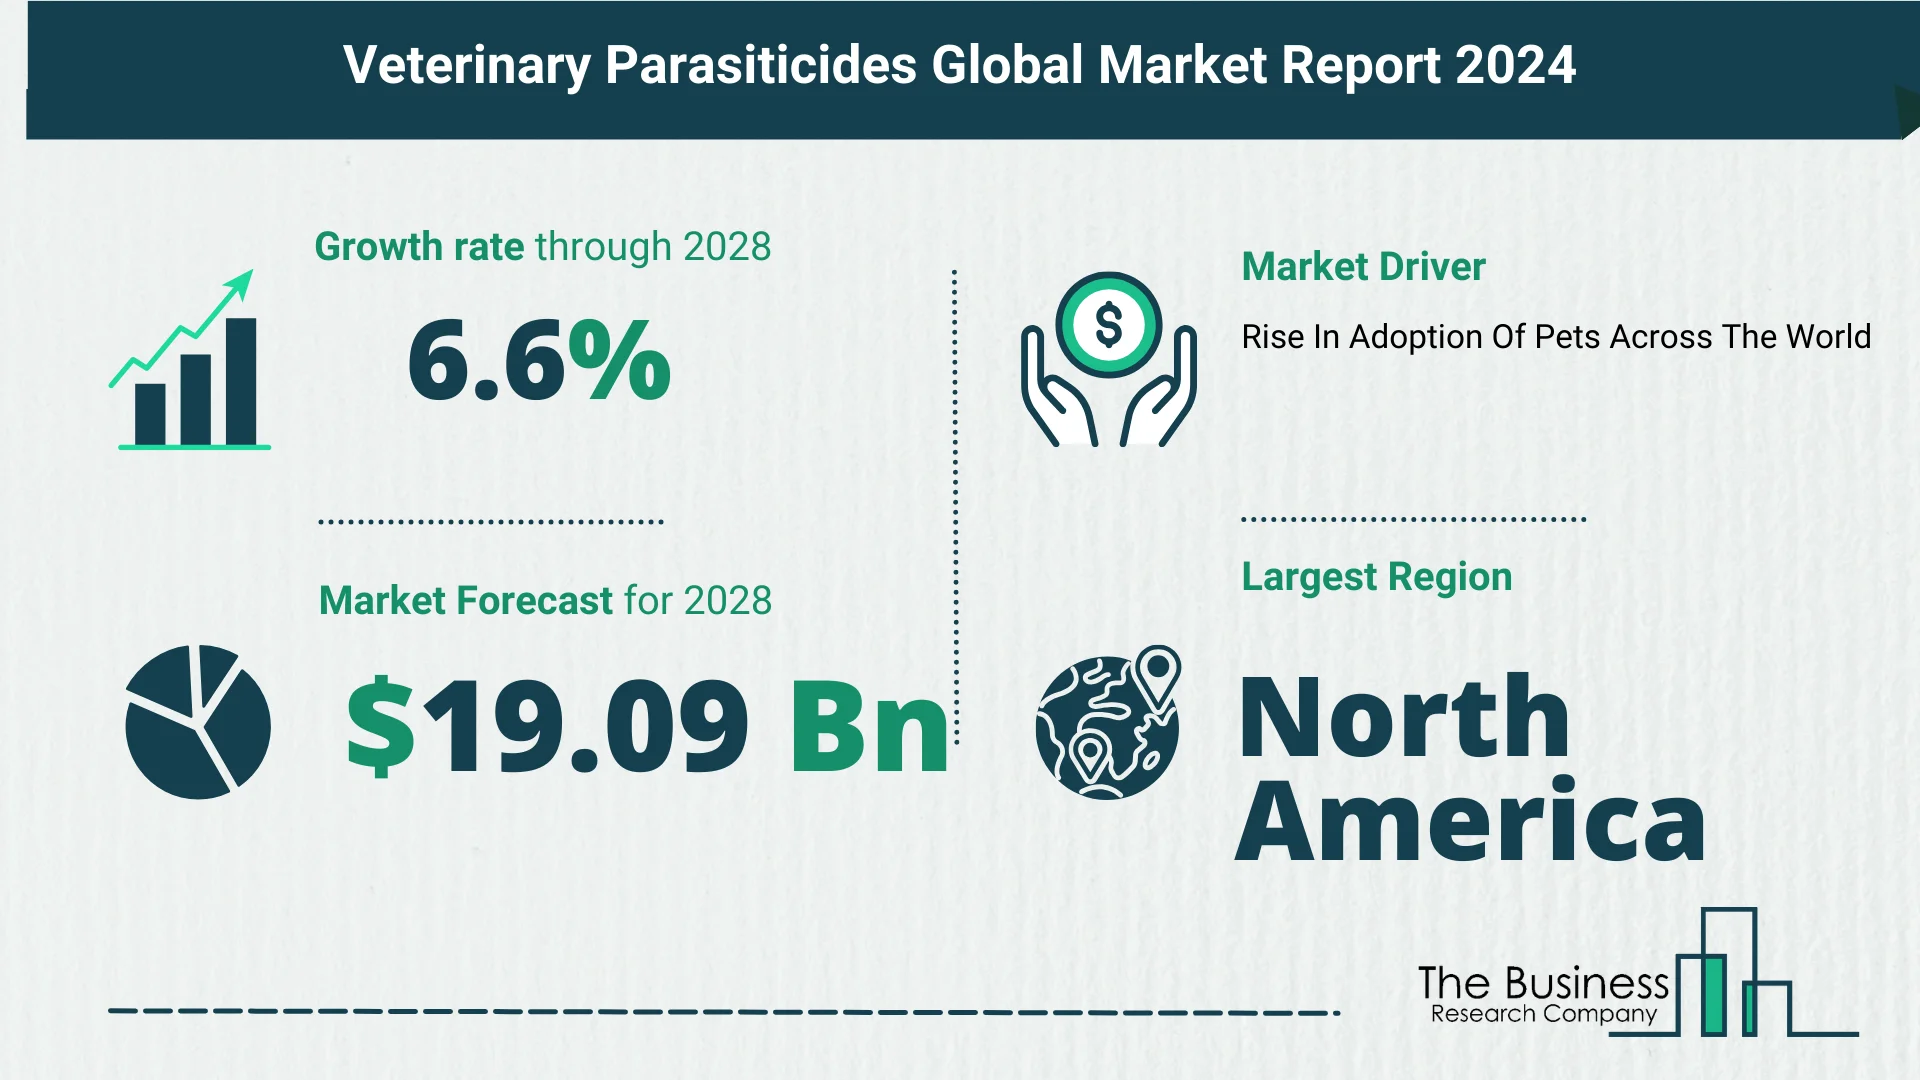 What Is The Forecast Growth Rate For The Veterinary Parasiticides Market?